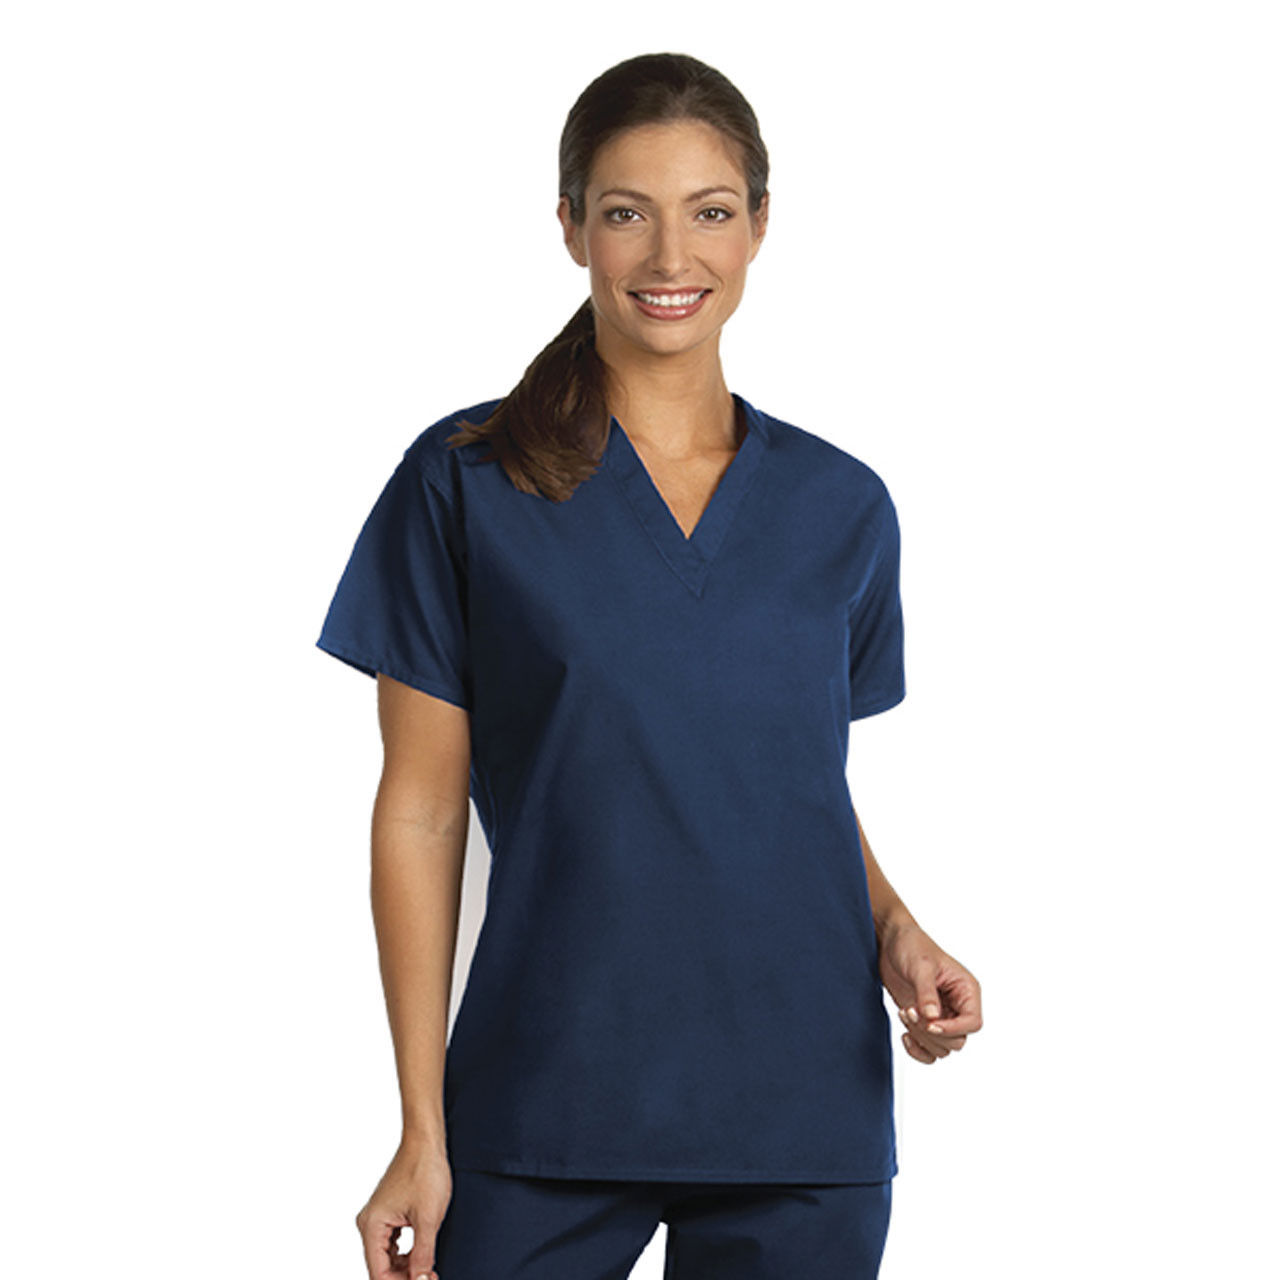 What is the material of the cheap scrubs set in navy blue reversible v-neck?